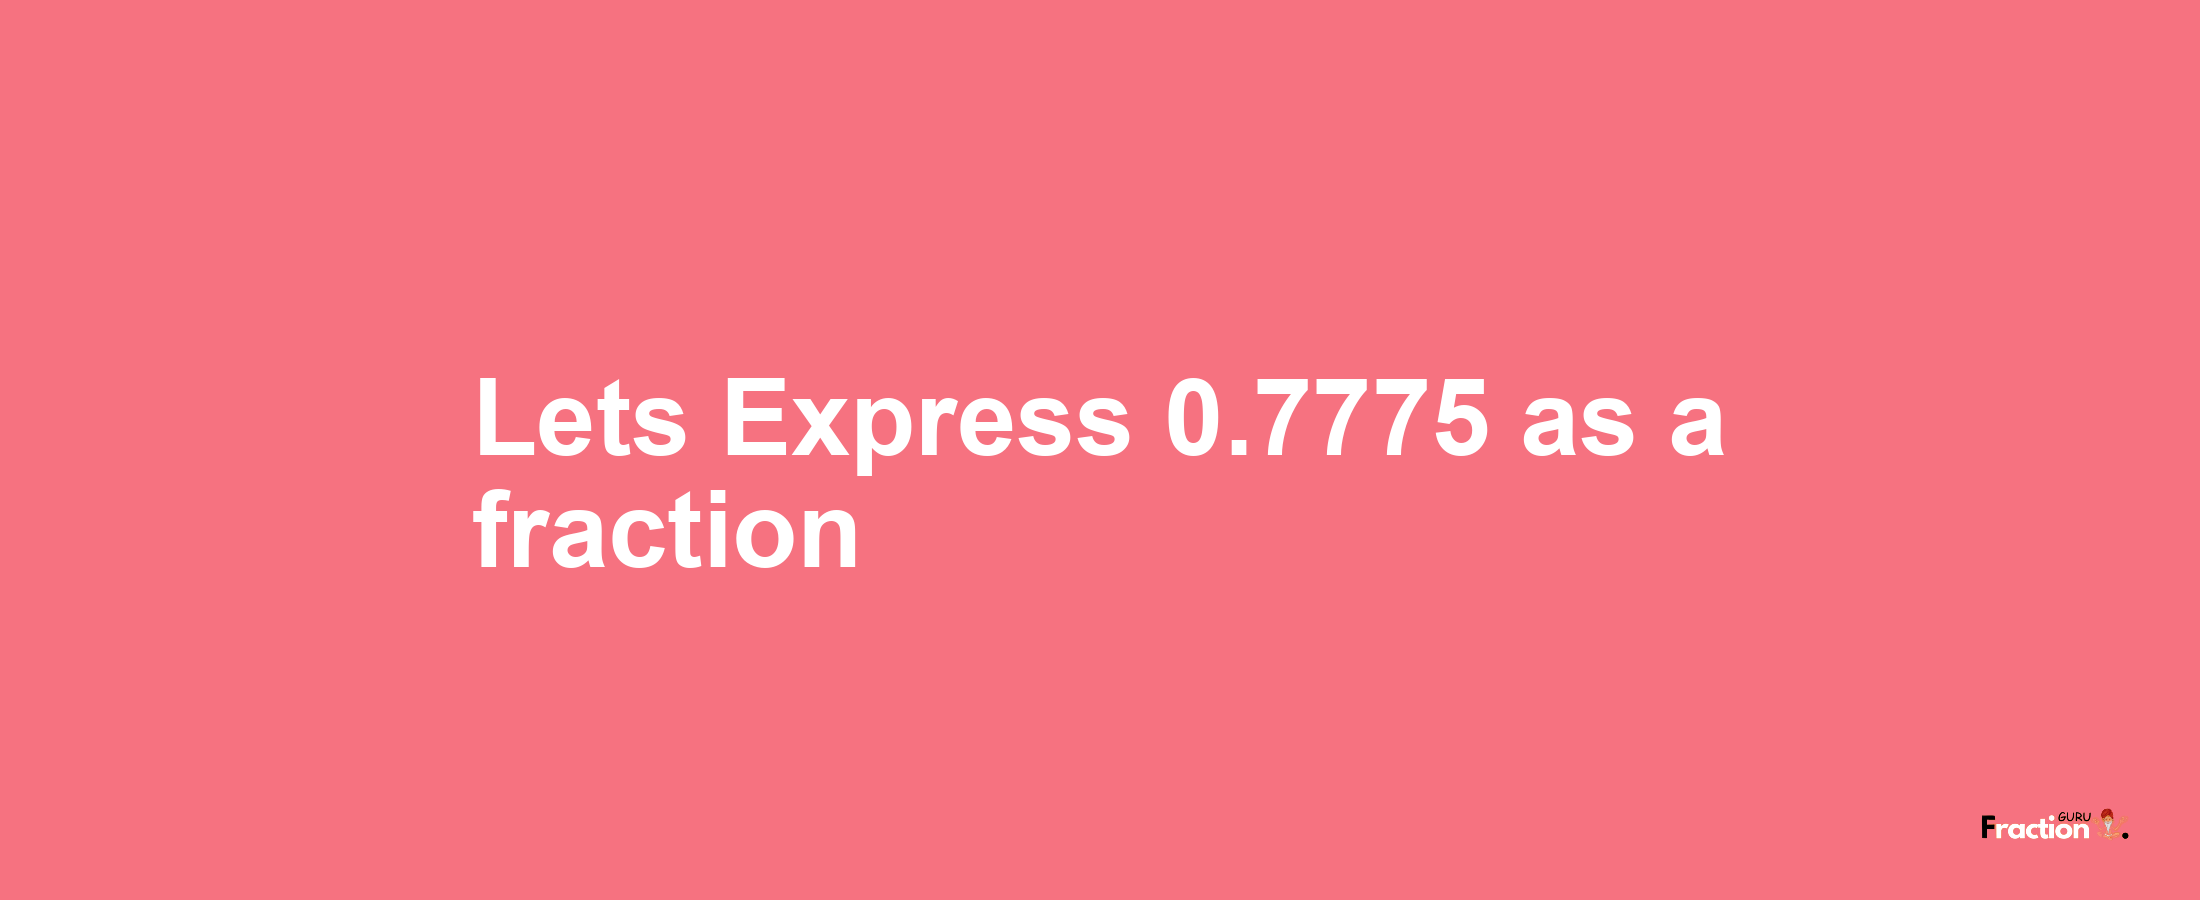 Lets Express 0.7775 as afraction